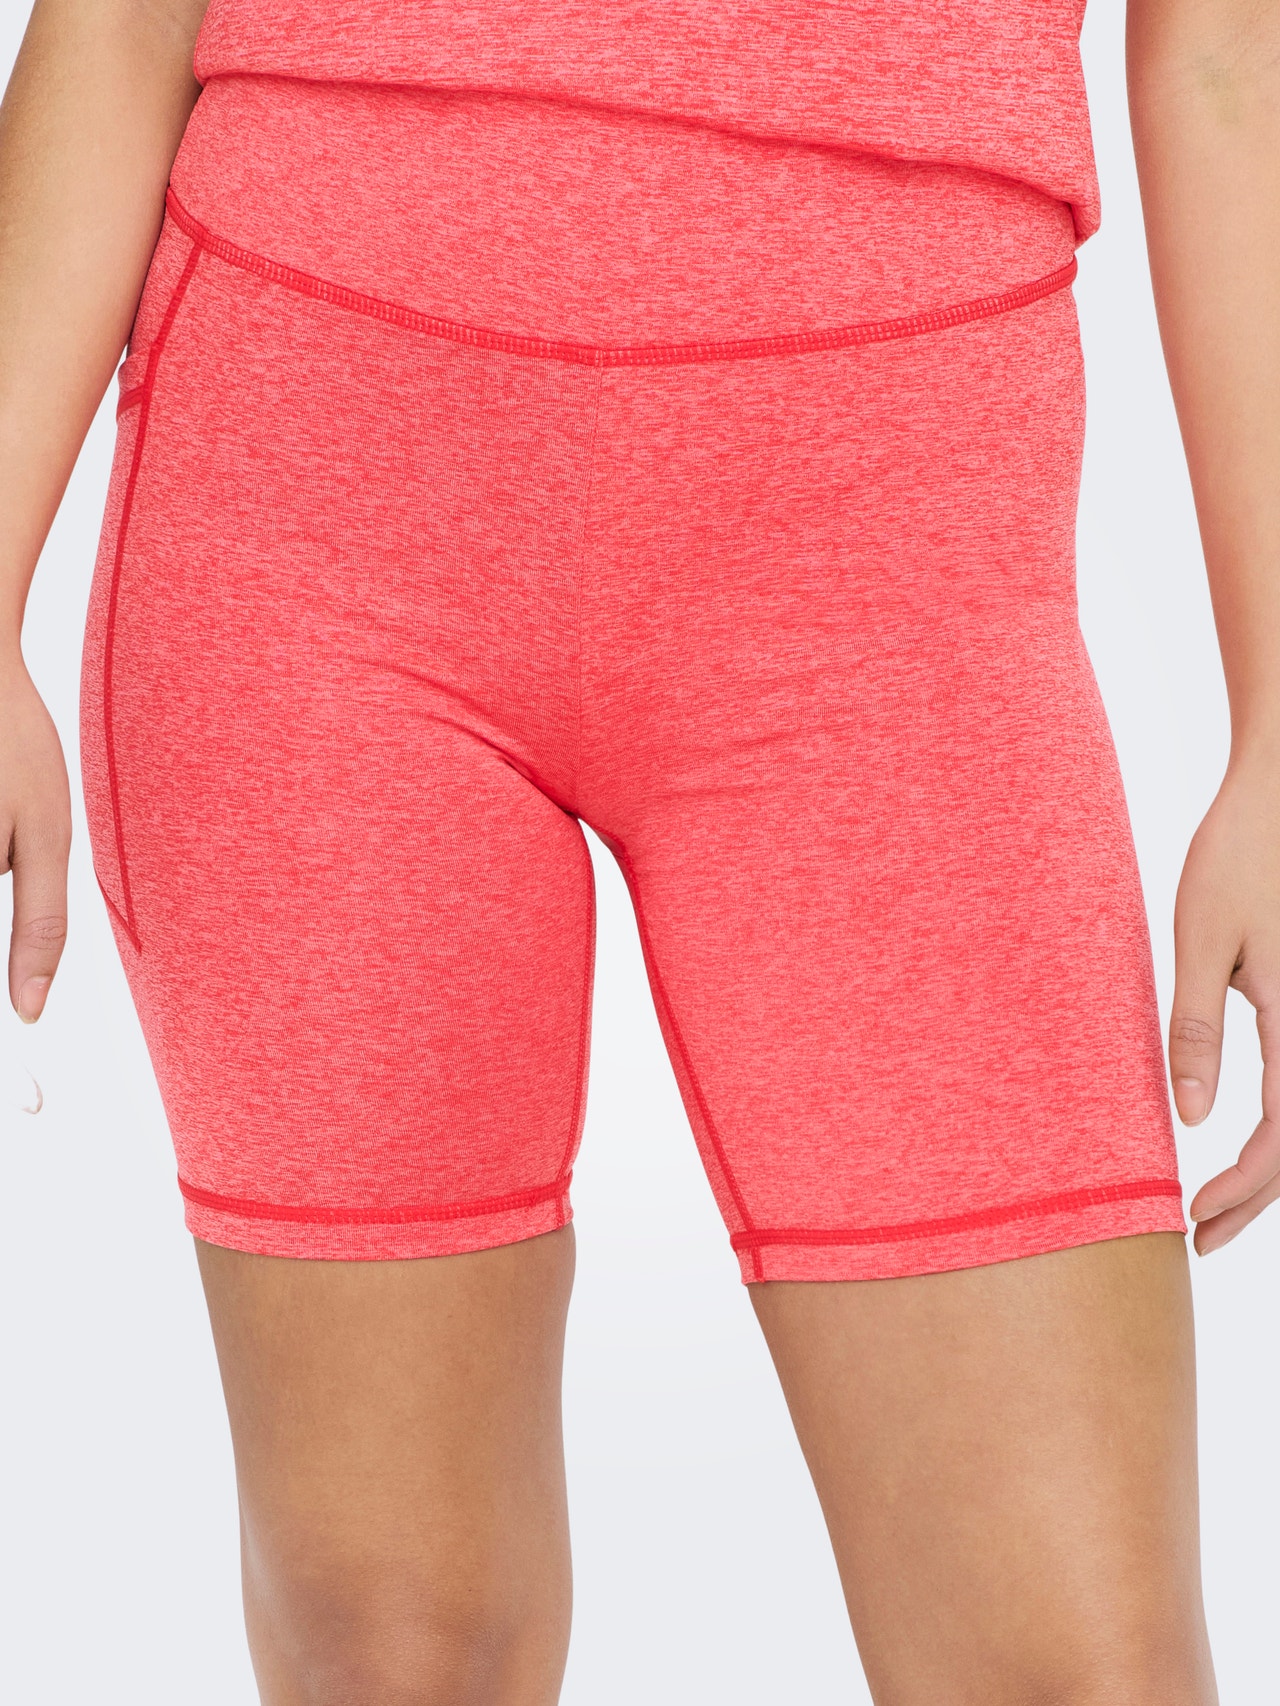 ONLY Shorts Corte slim -Sun Kissed Coral - 15283881